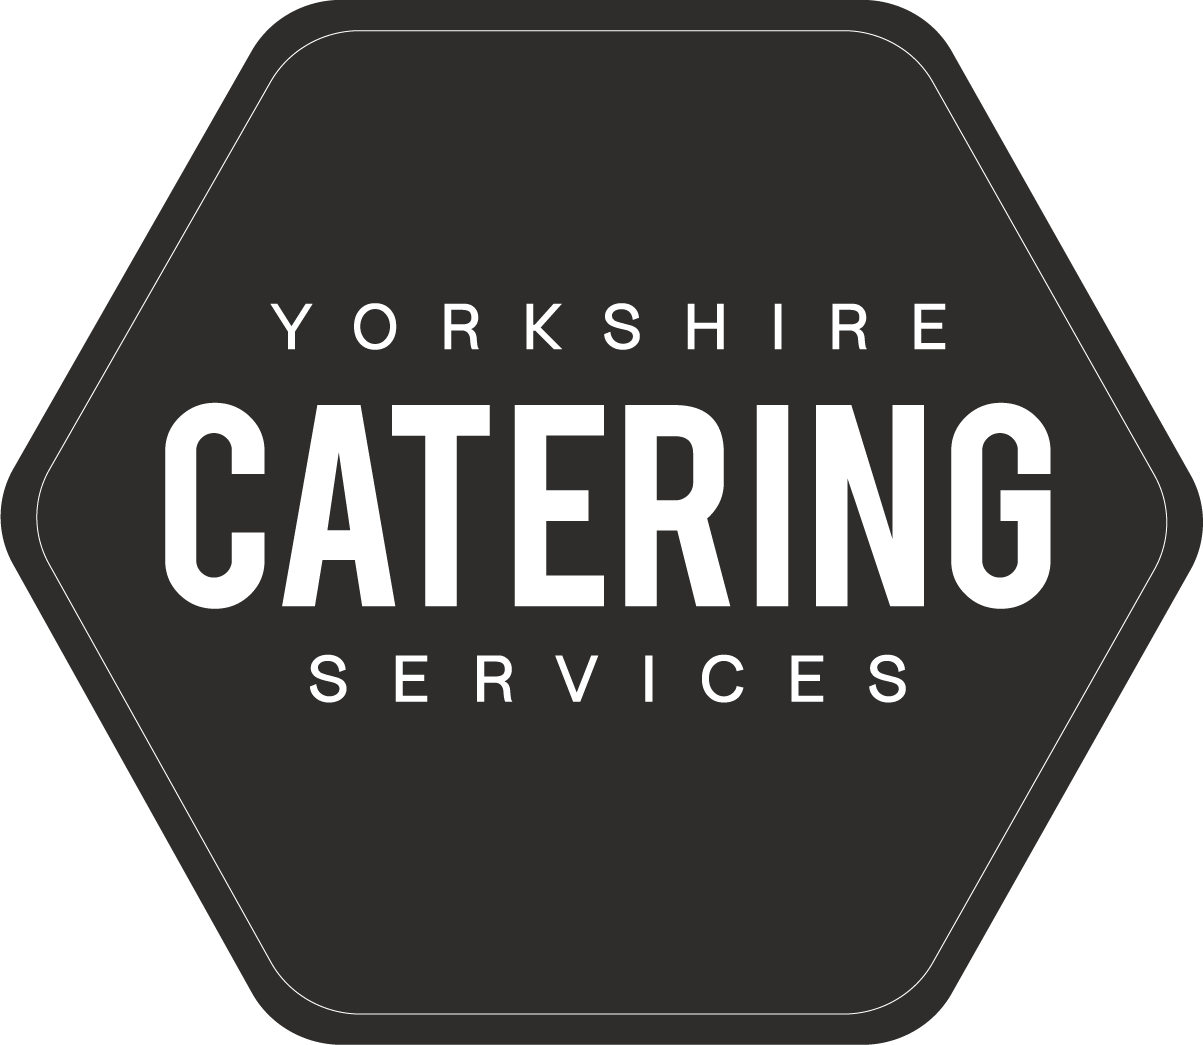 Yorkshire Catering Services